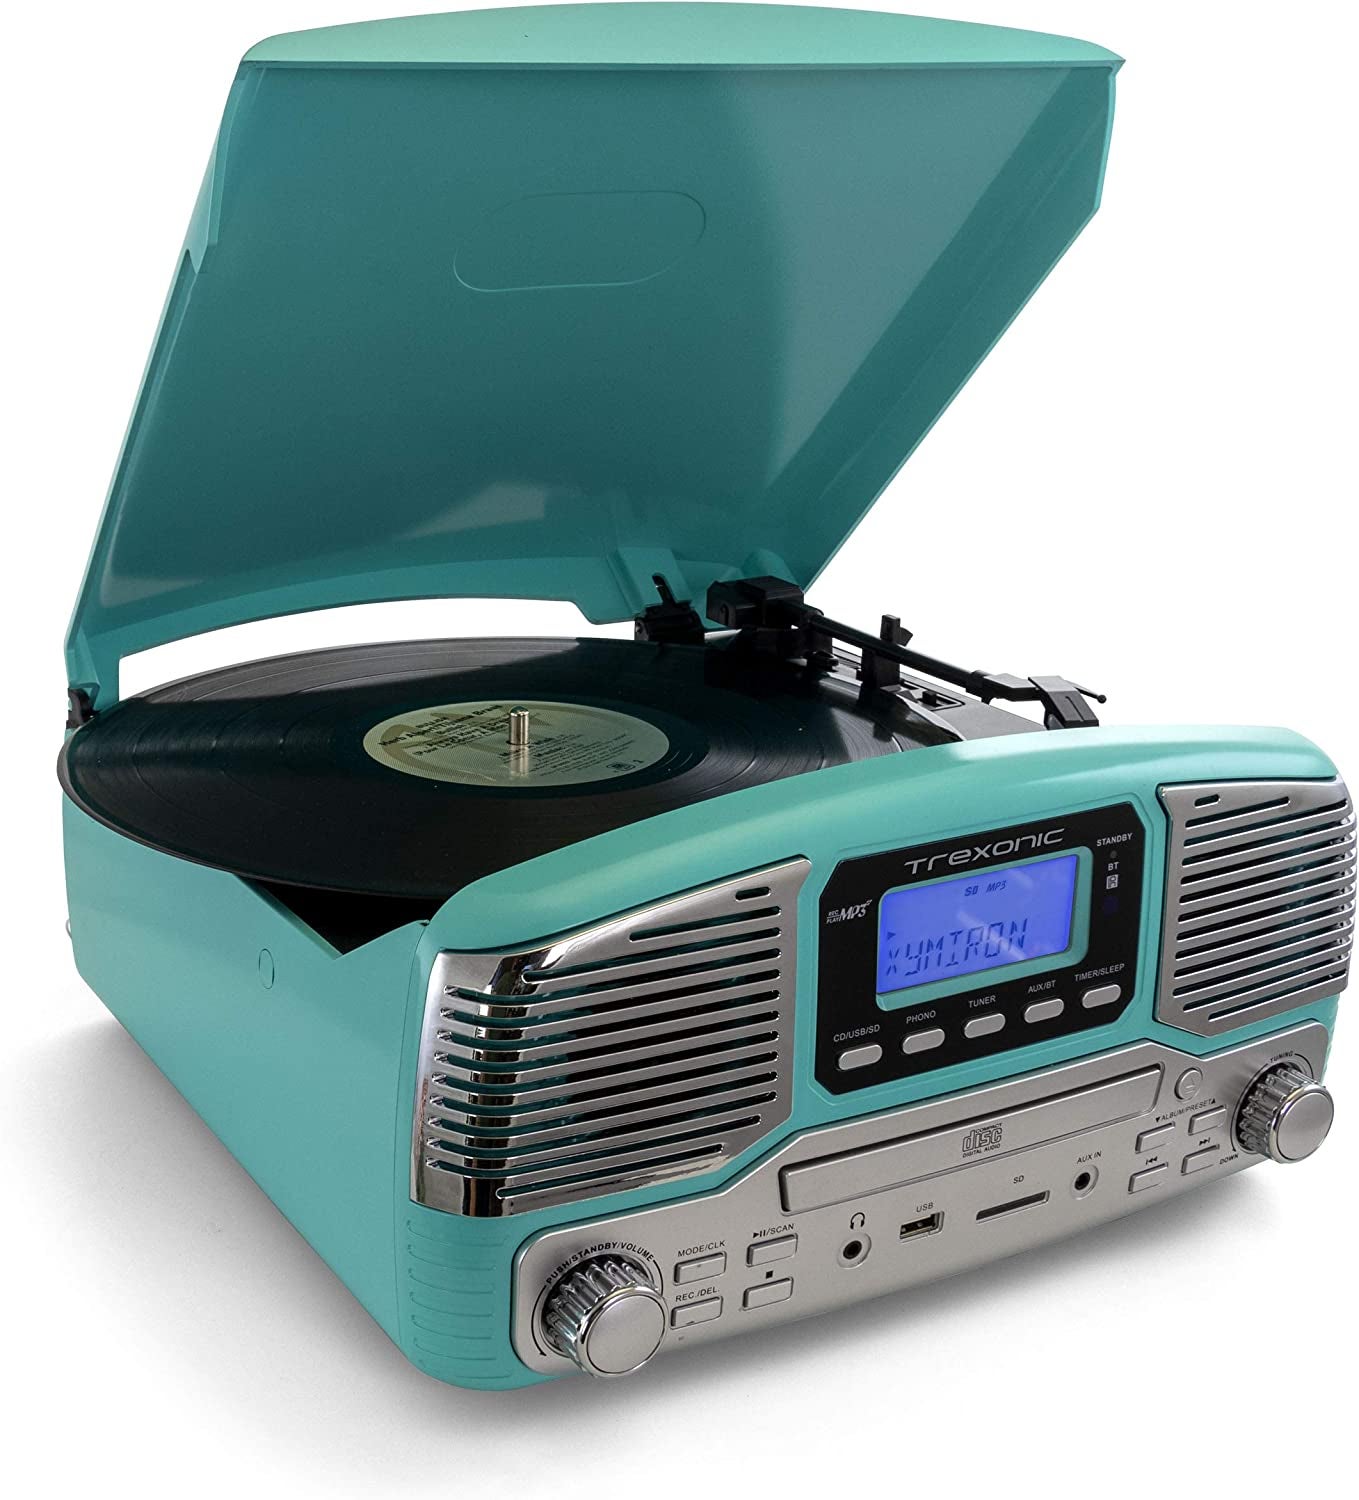 Teal retro-styled record player with two silver speakers, CD player, buttons, and dials with a black vinyl on top and matching teal cover open on a white background